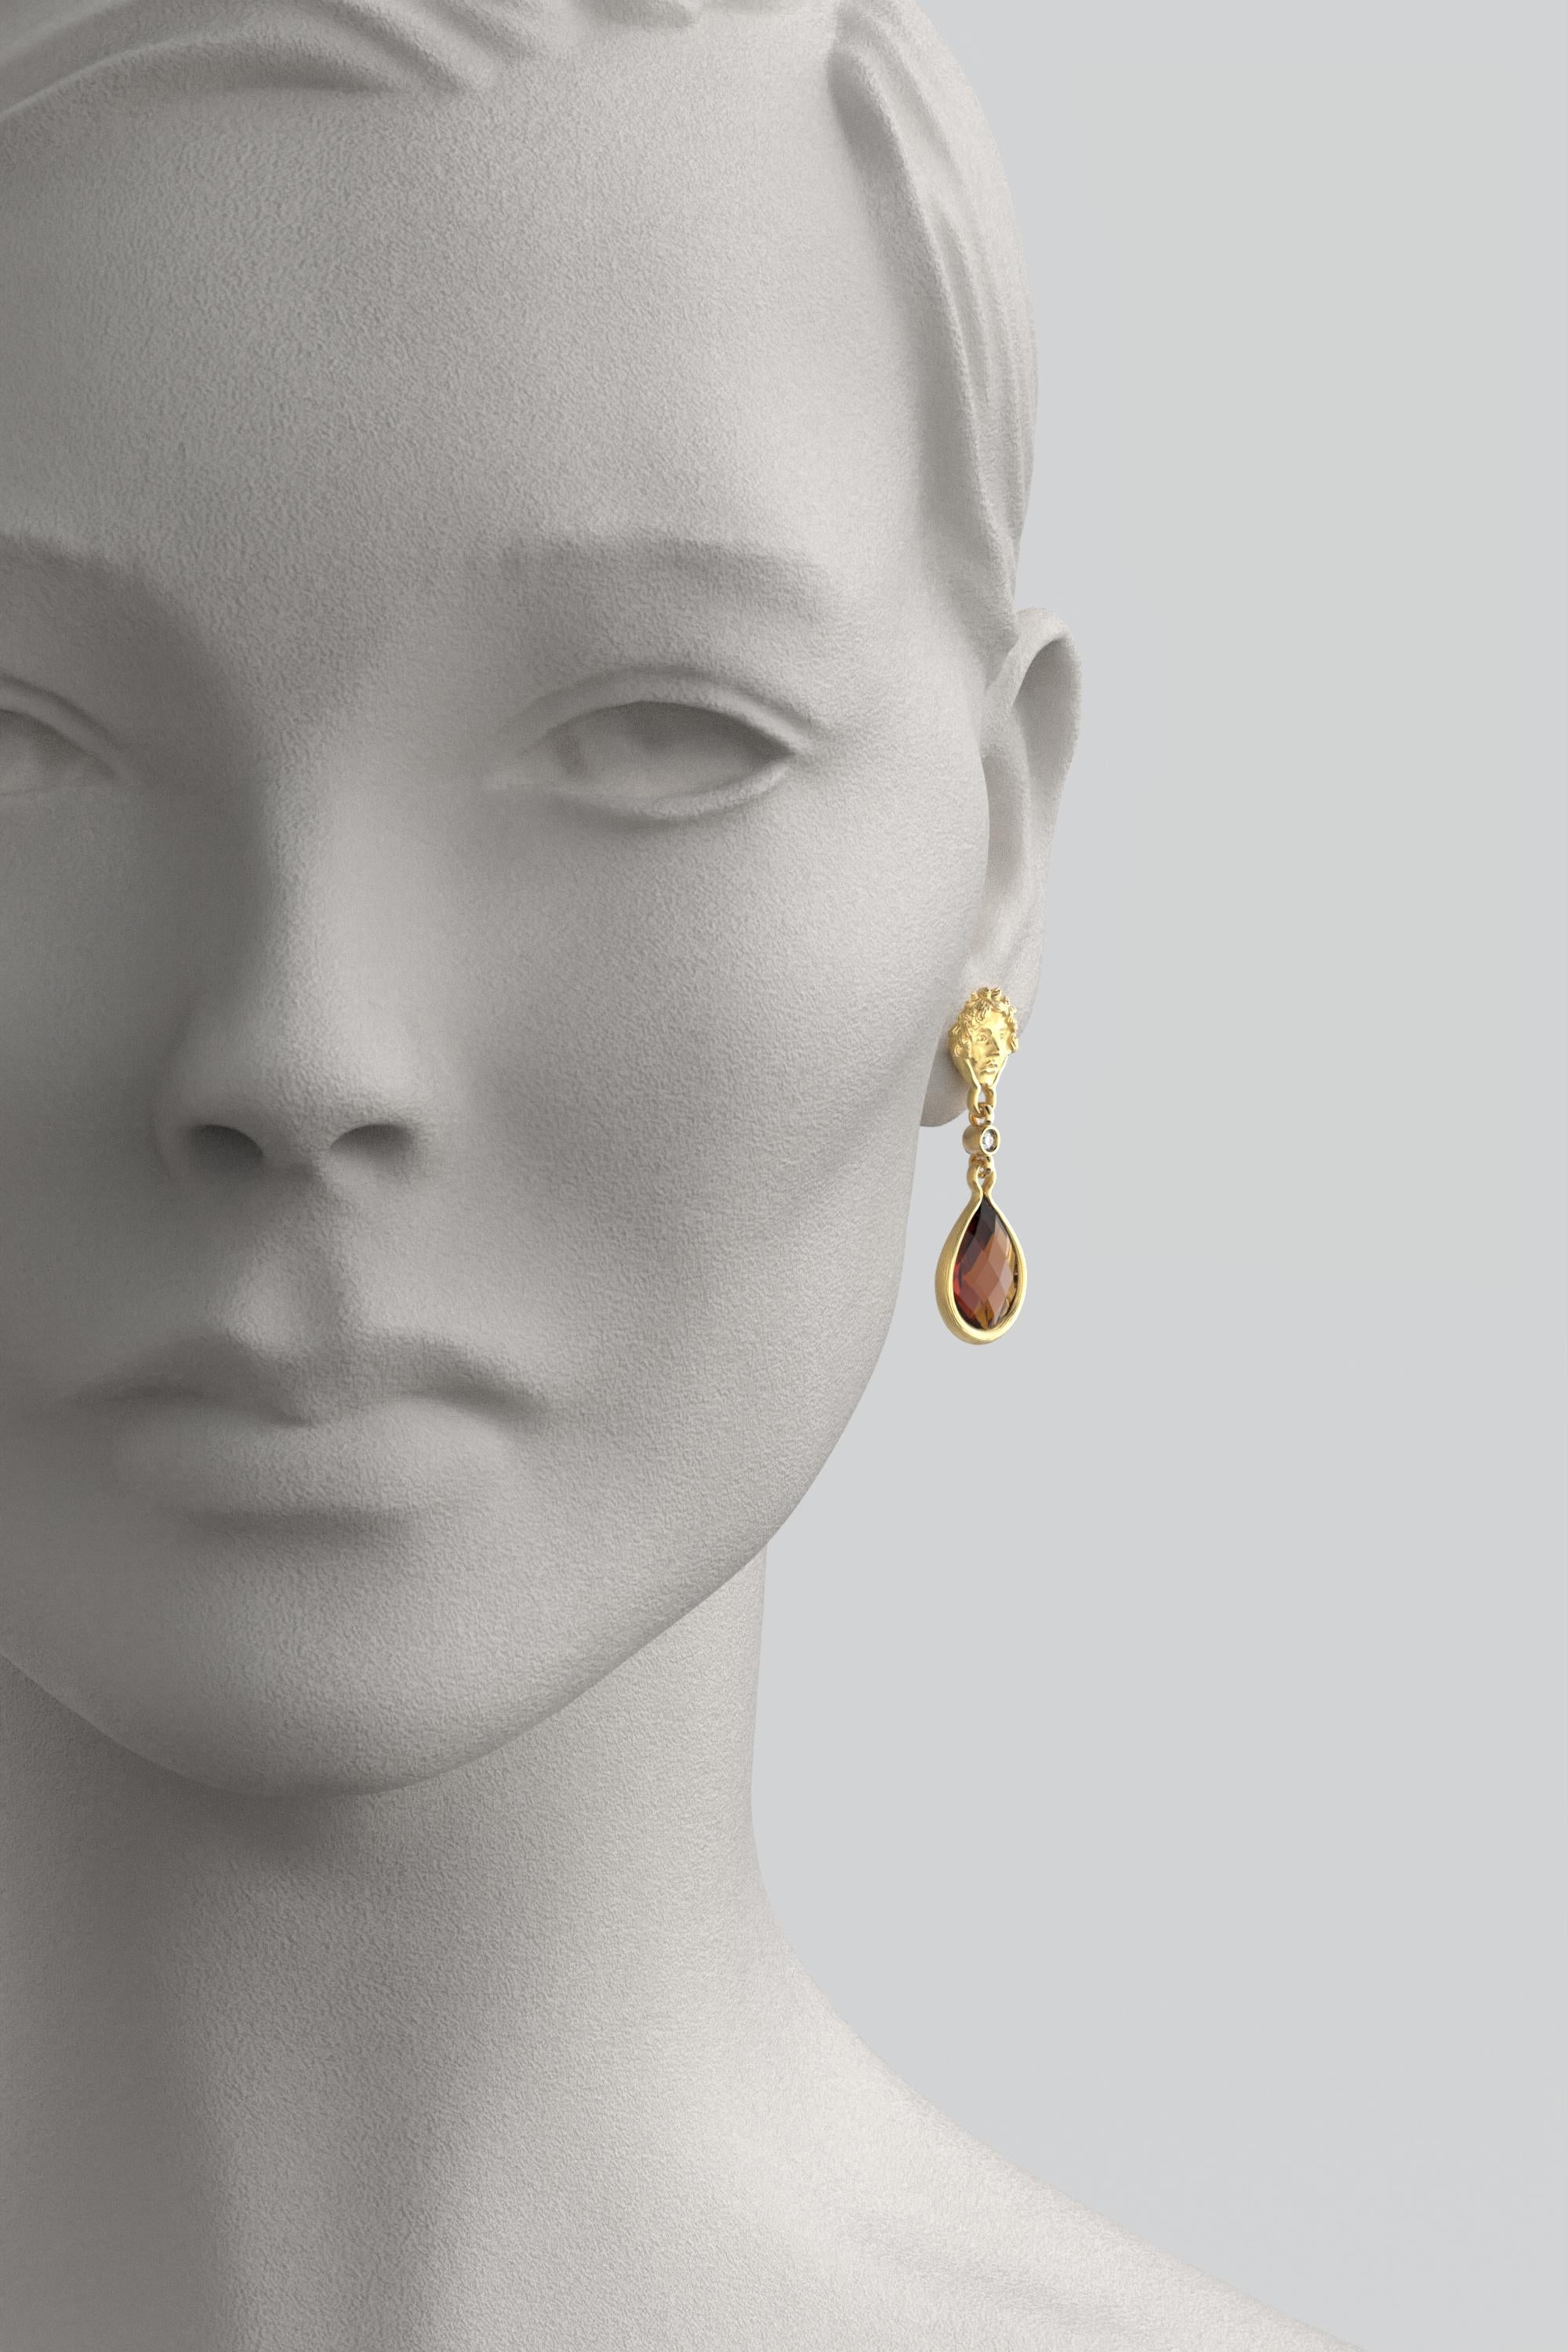 Pear Cut Oltremare Gioielli 14k Gold Madeira Citrine and Diamond Dangle Drop Earrings  For Sale